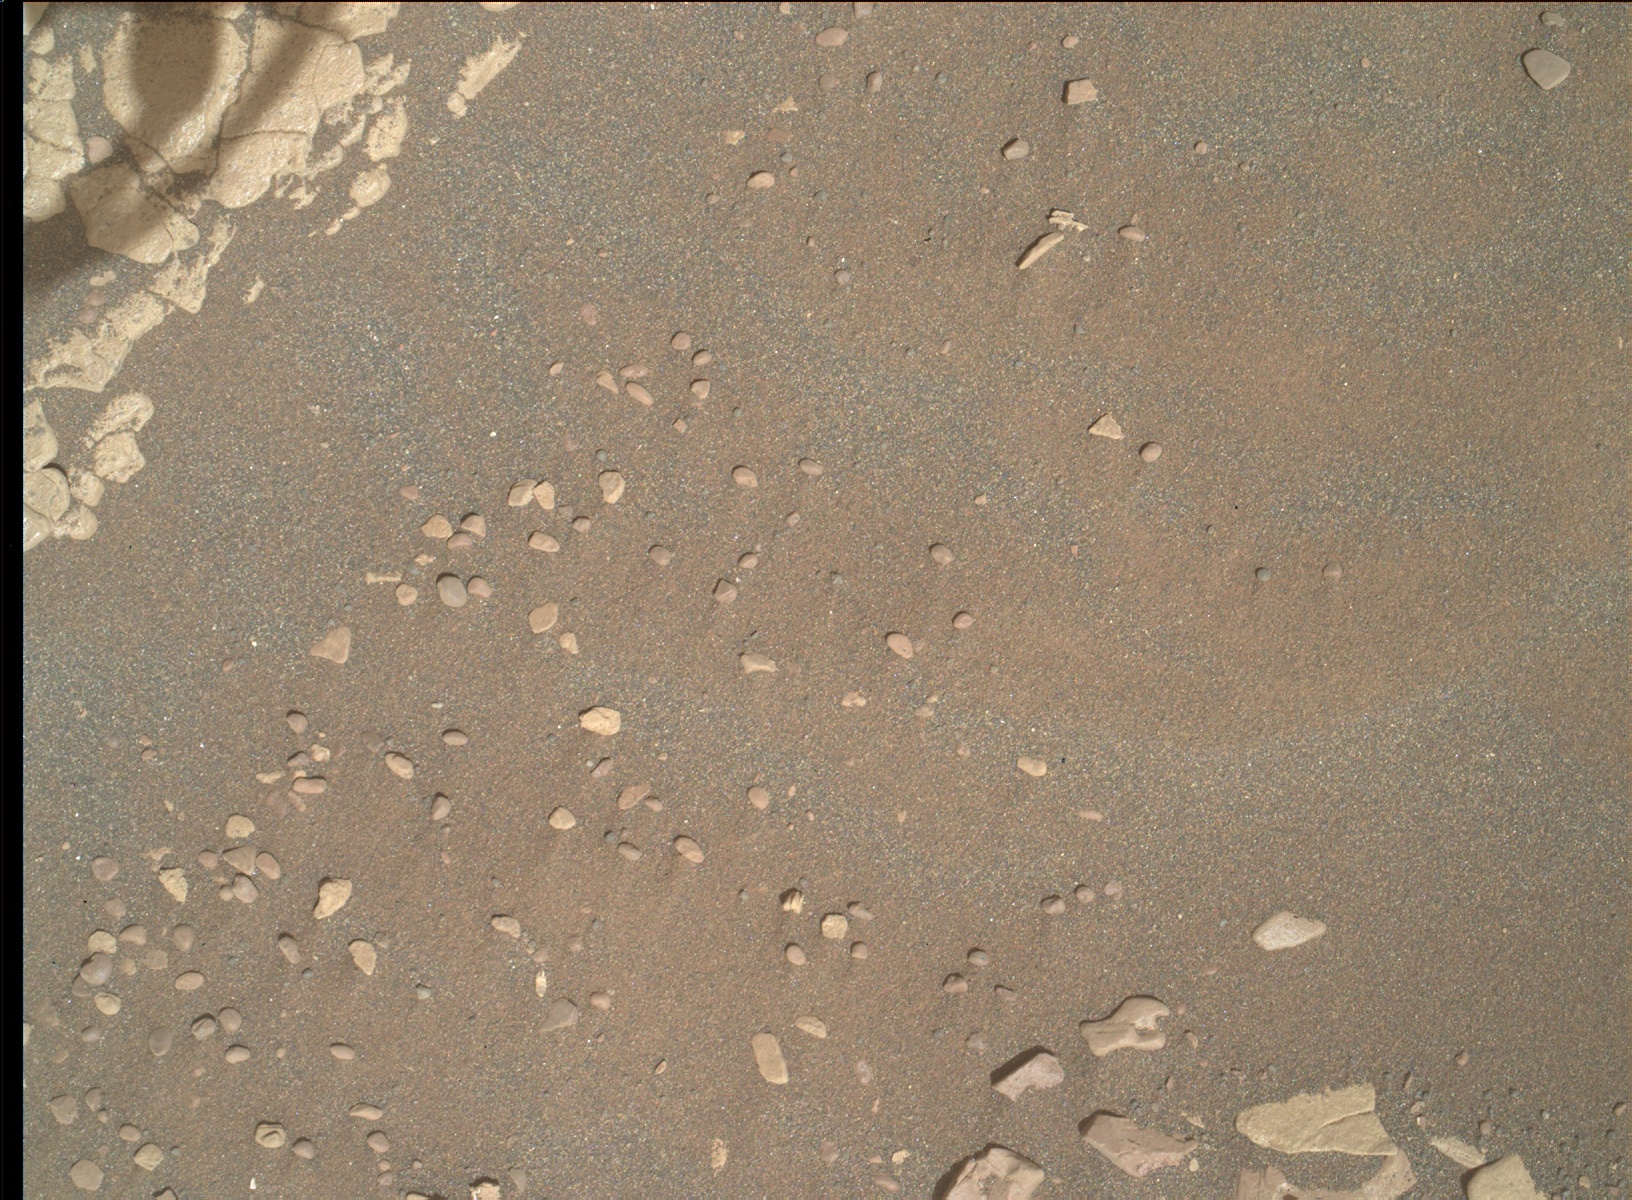 Nasa's Mars rover Curiosity acquired this image using its Mars Hand Lens Imager (MAHLI) on Sol 2910